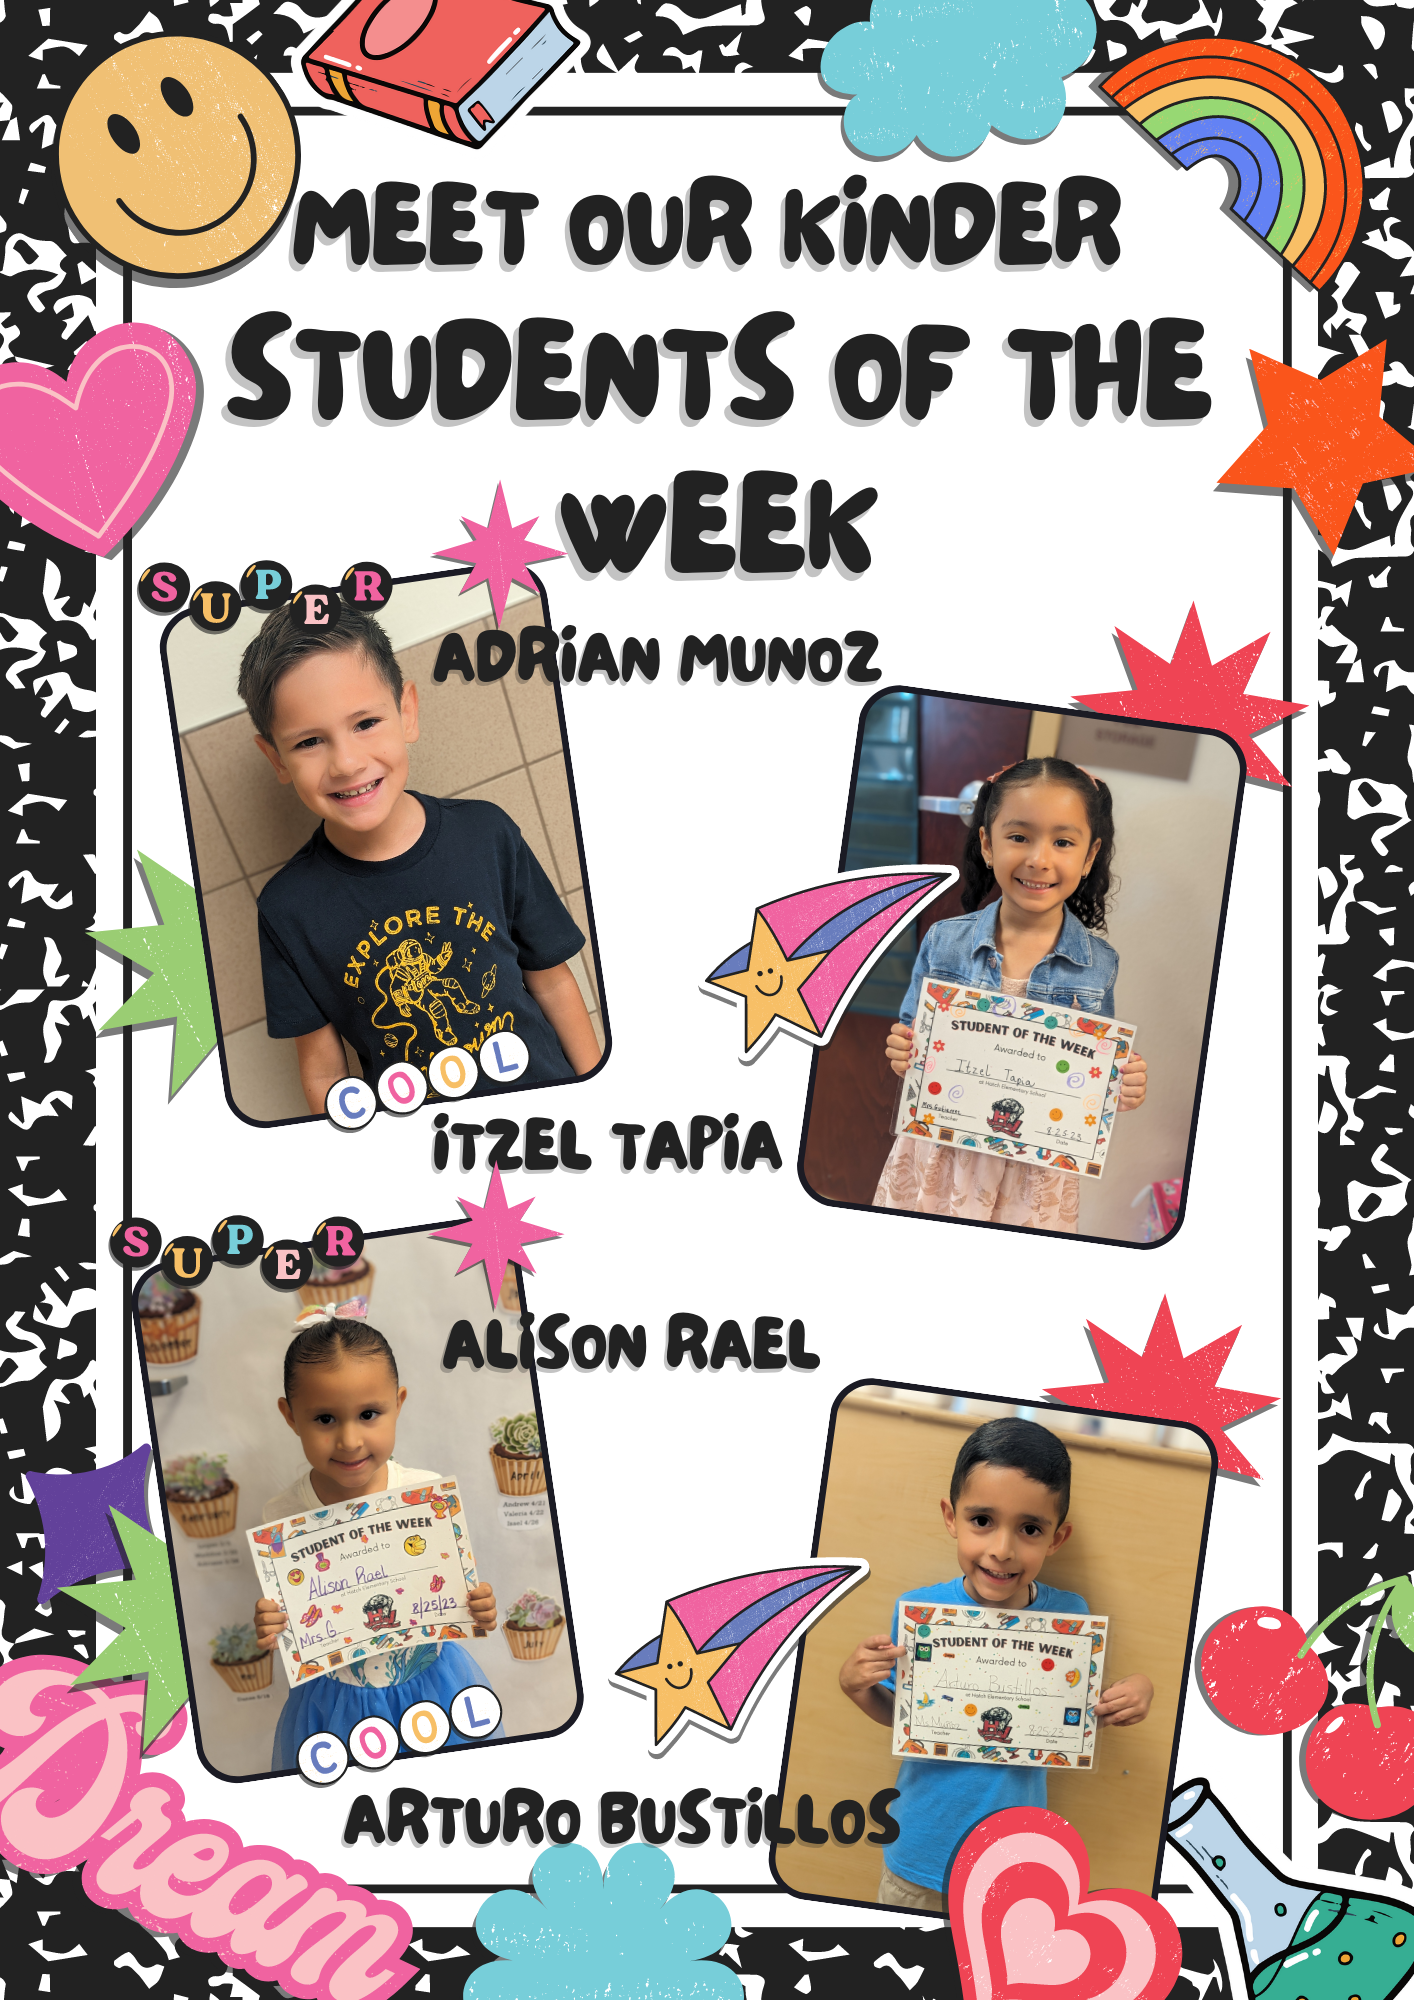 Kinder Students of the Week